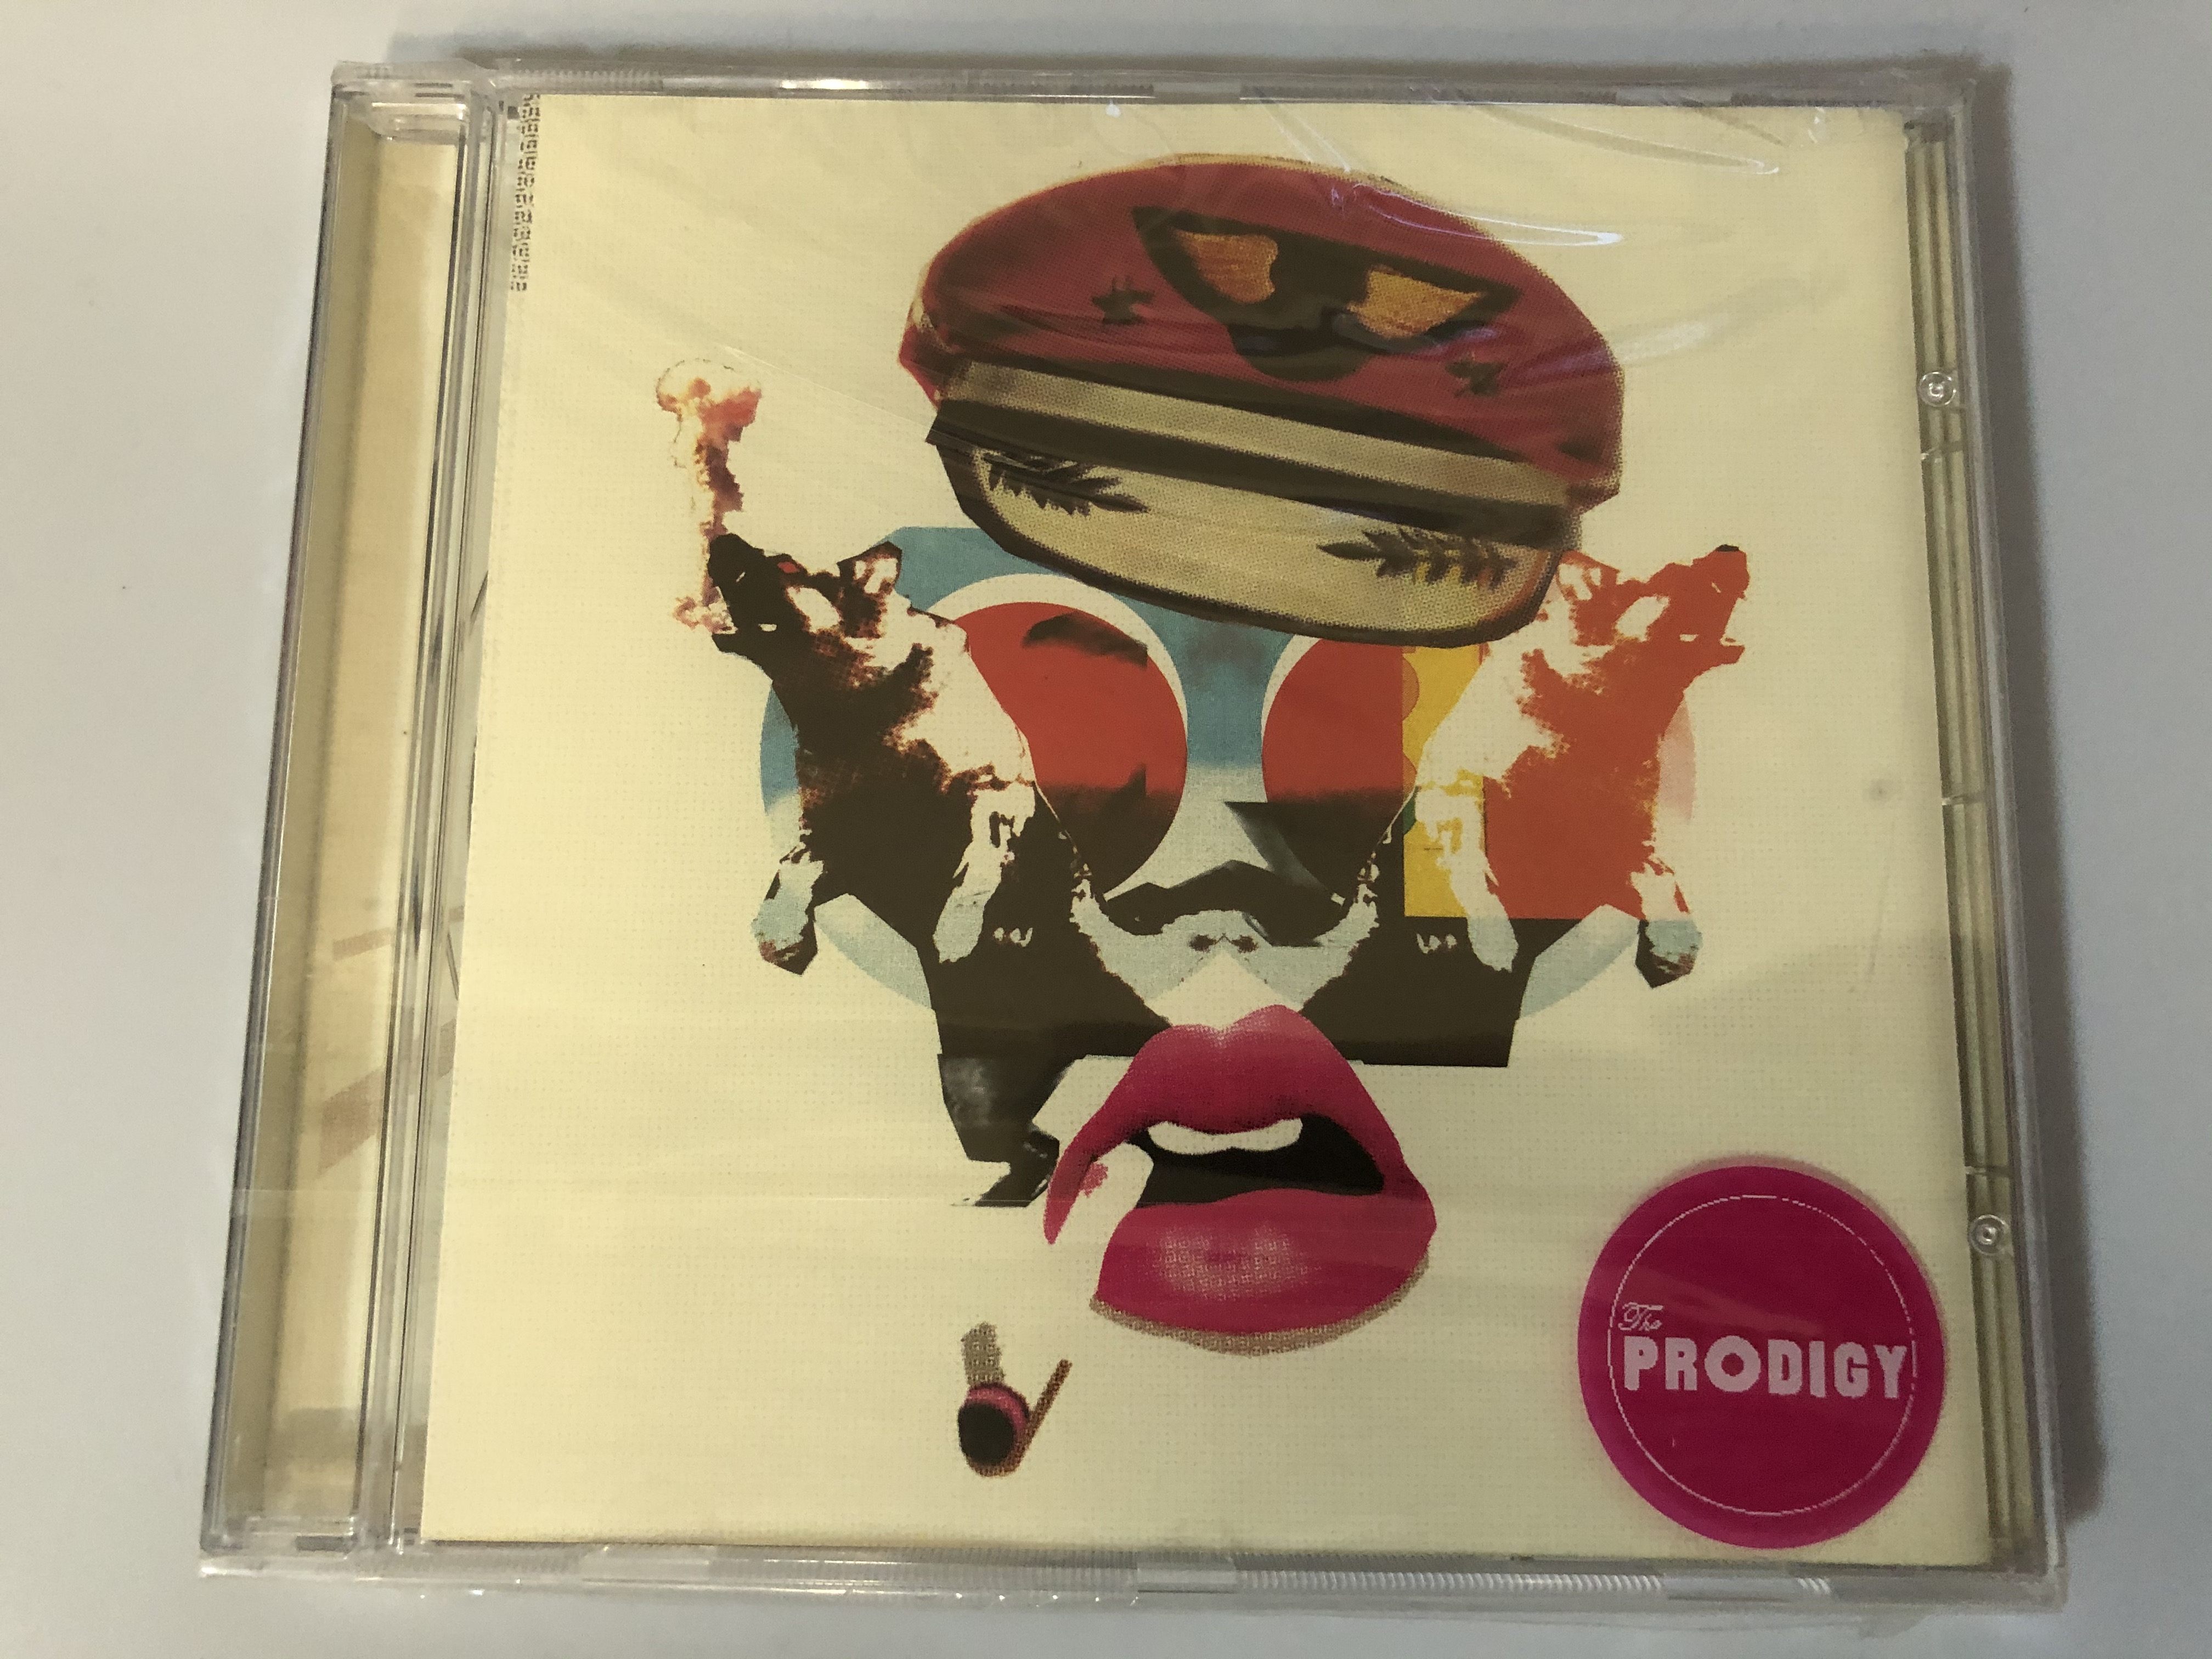 the-prodigy-always-outnumbered-never-outgunned-cls-records-audio-cd-2004-cls-sa0052-1-.jpg